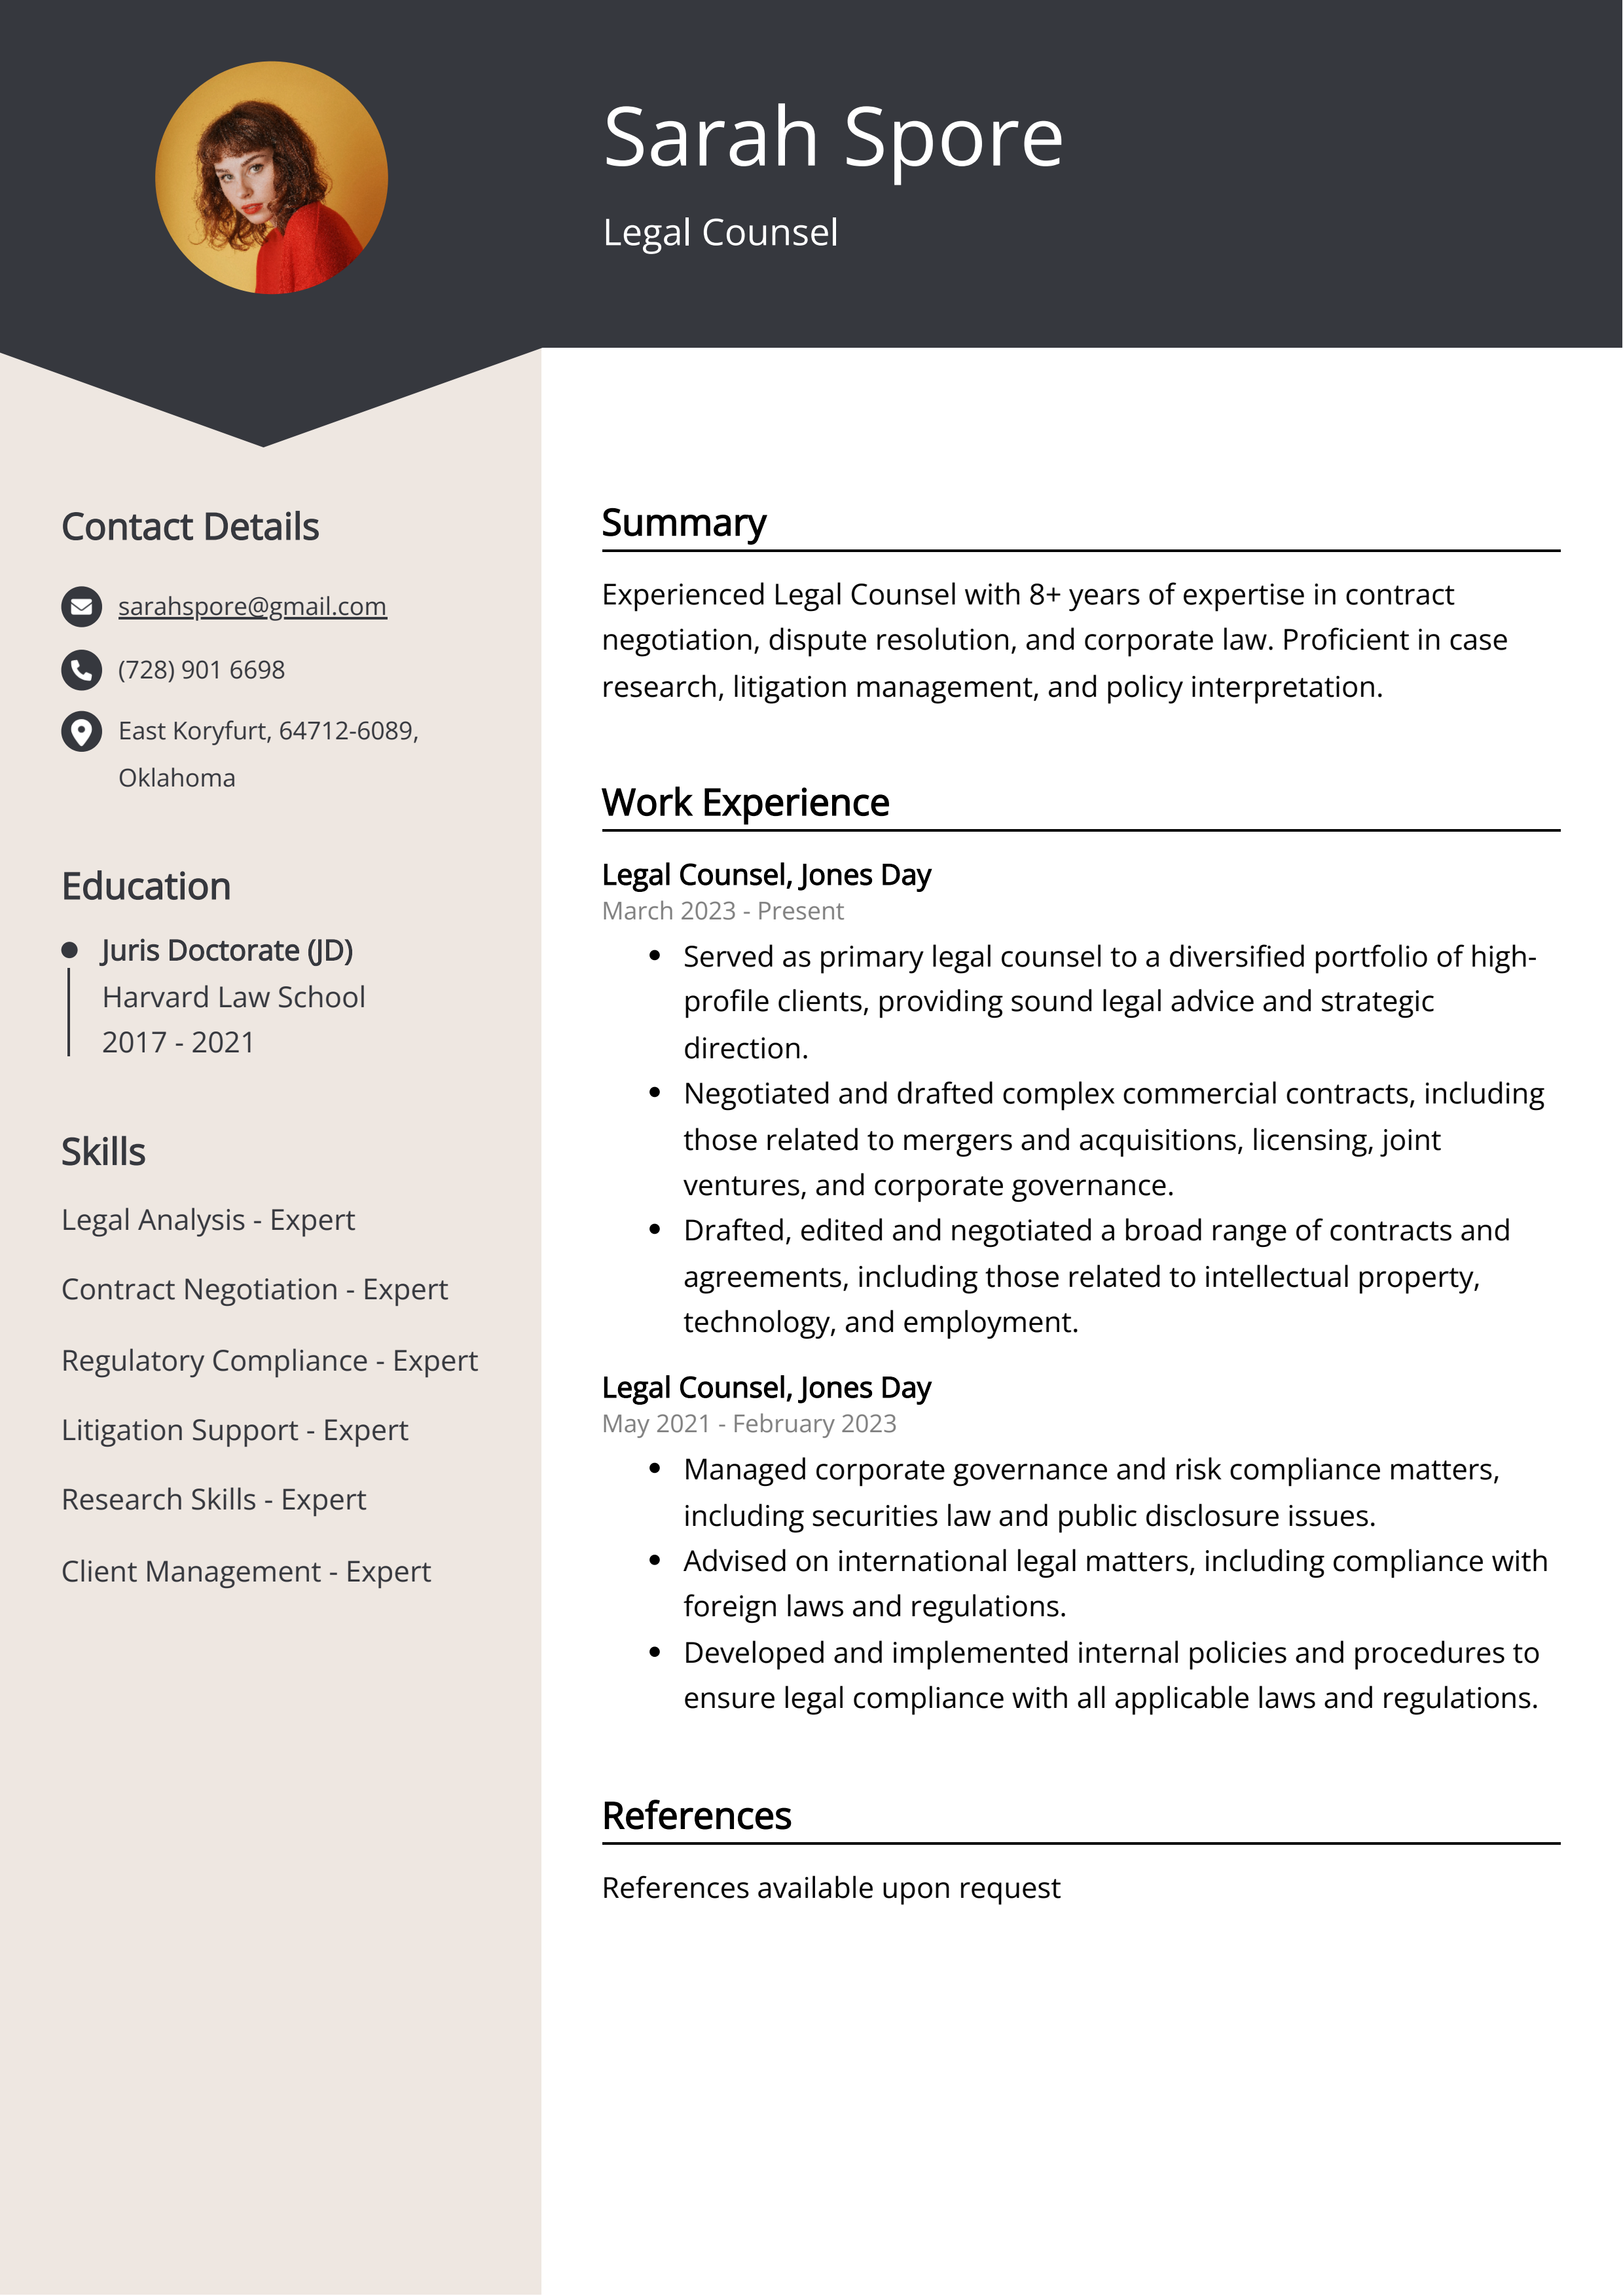 Legal Counsel CV Example